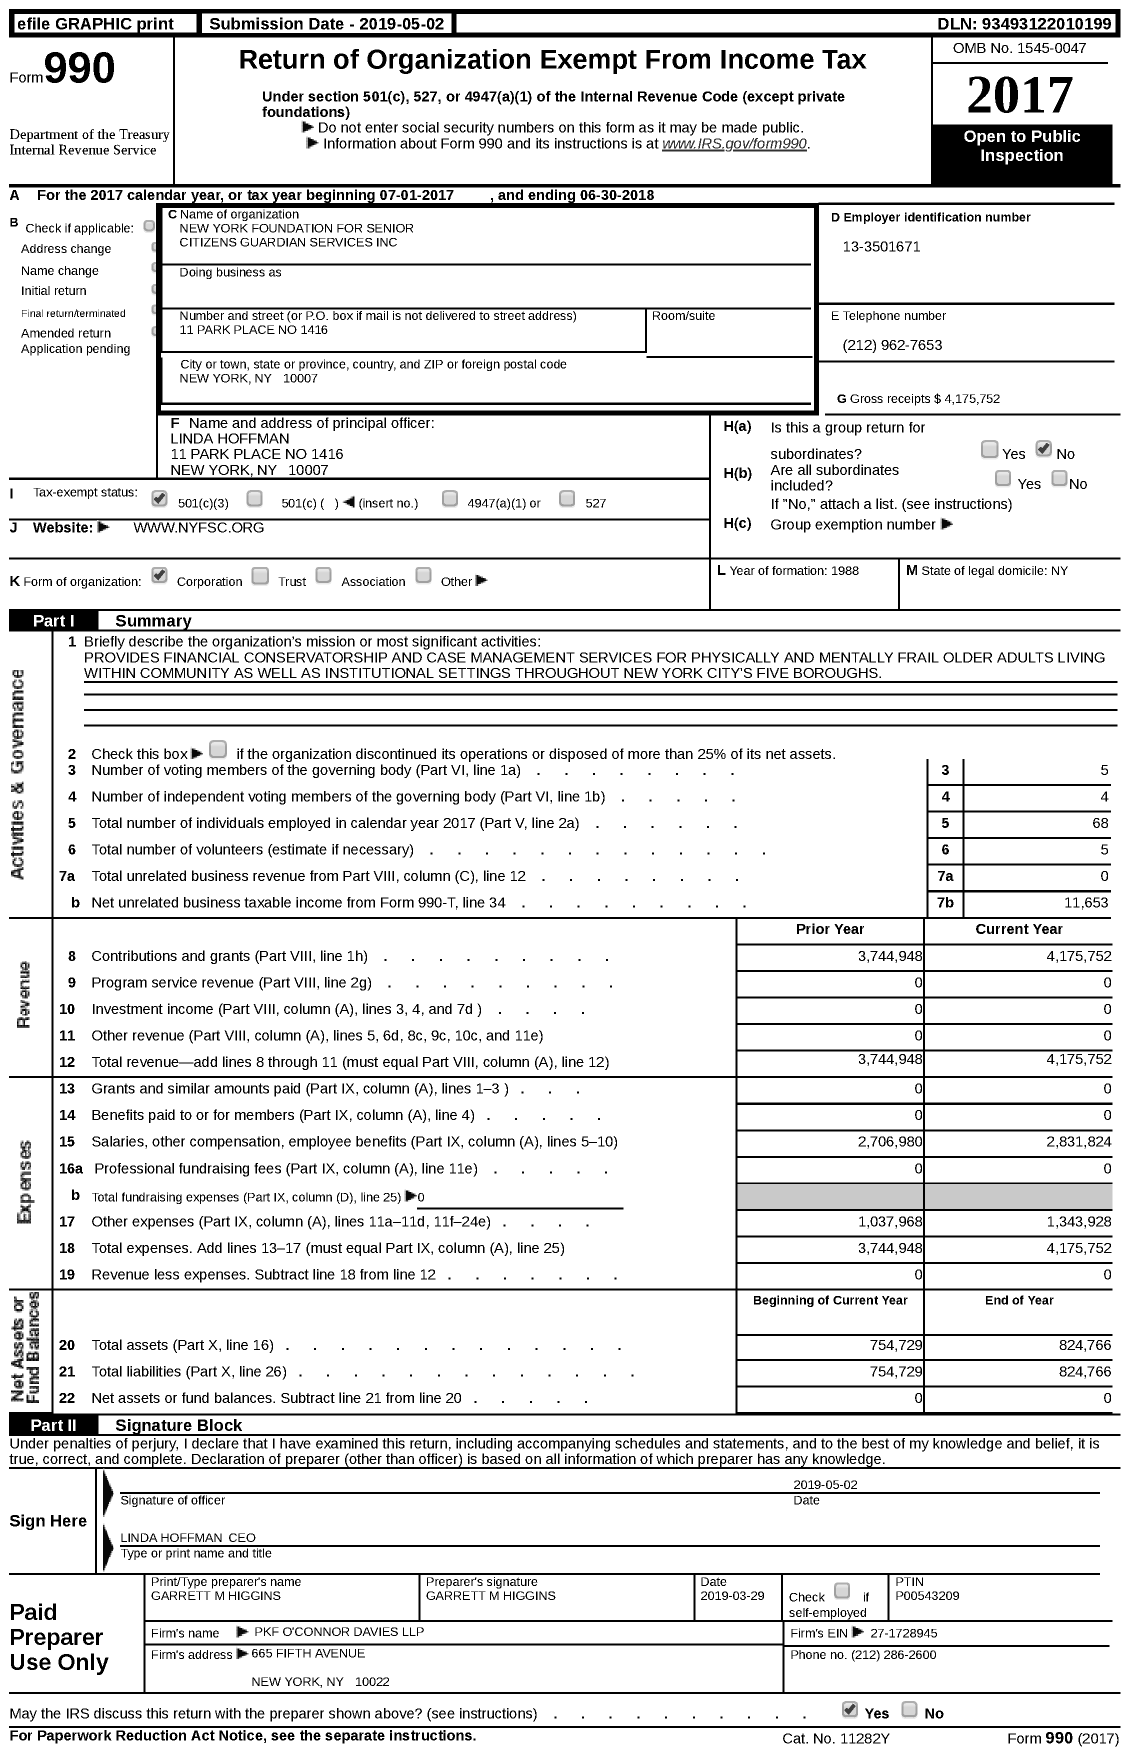 Image of first page of 2017 Form 990 for New York Foundation for Senior Citizens Guardian Services (NYFSC)